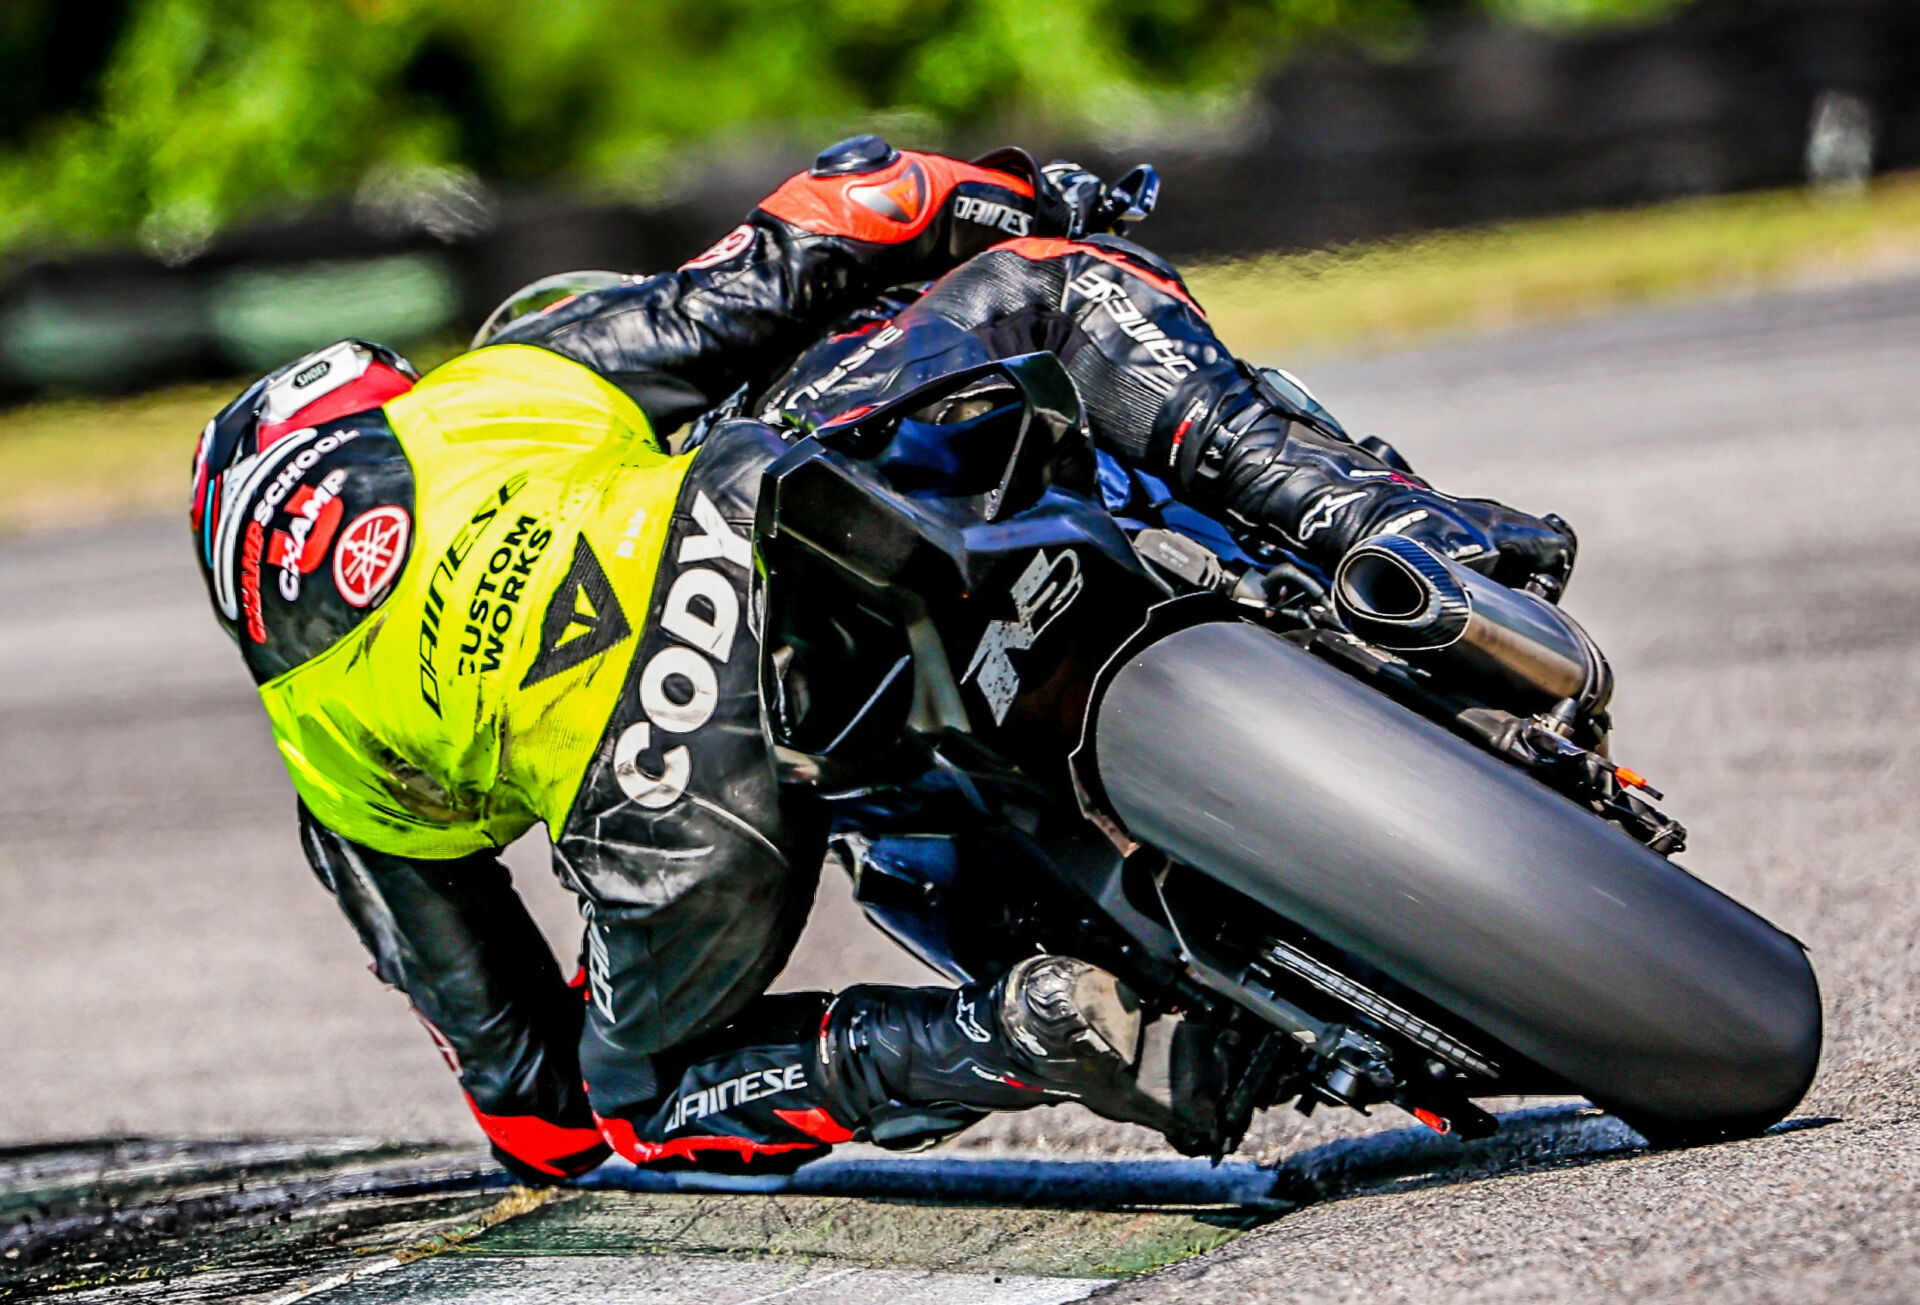 Cody Wyman tries to find the limits of the 3.4-hour-old Dunlop front tire by dragging his elbow for the photographer on the way to the win at CMP. Photo by Apex Pro Photographer, courtesy Army of Darkness.